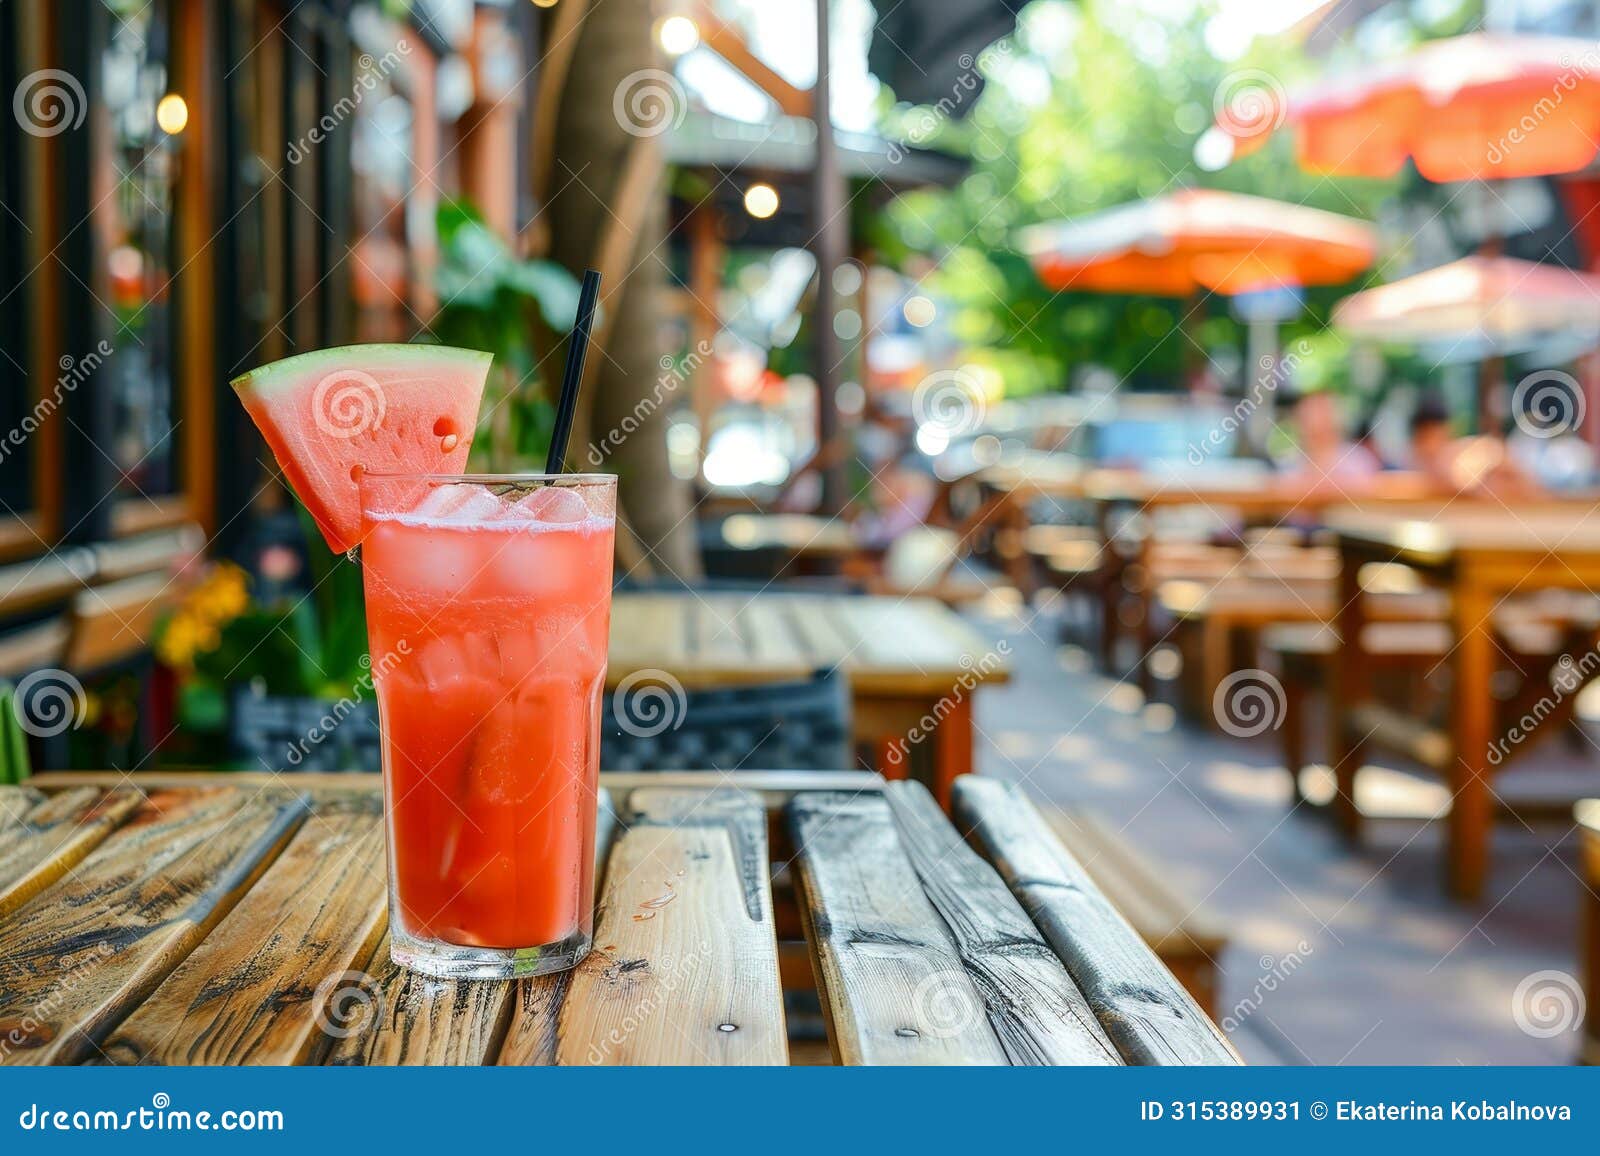 savor a delightful watermelon cocktail in a glass on a rustic wooden table at a quaint street cafe